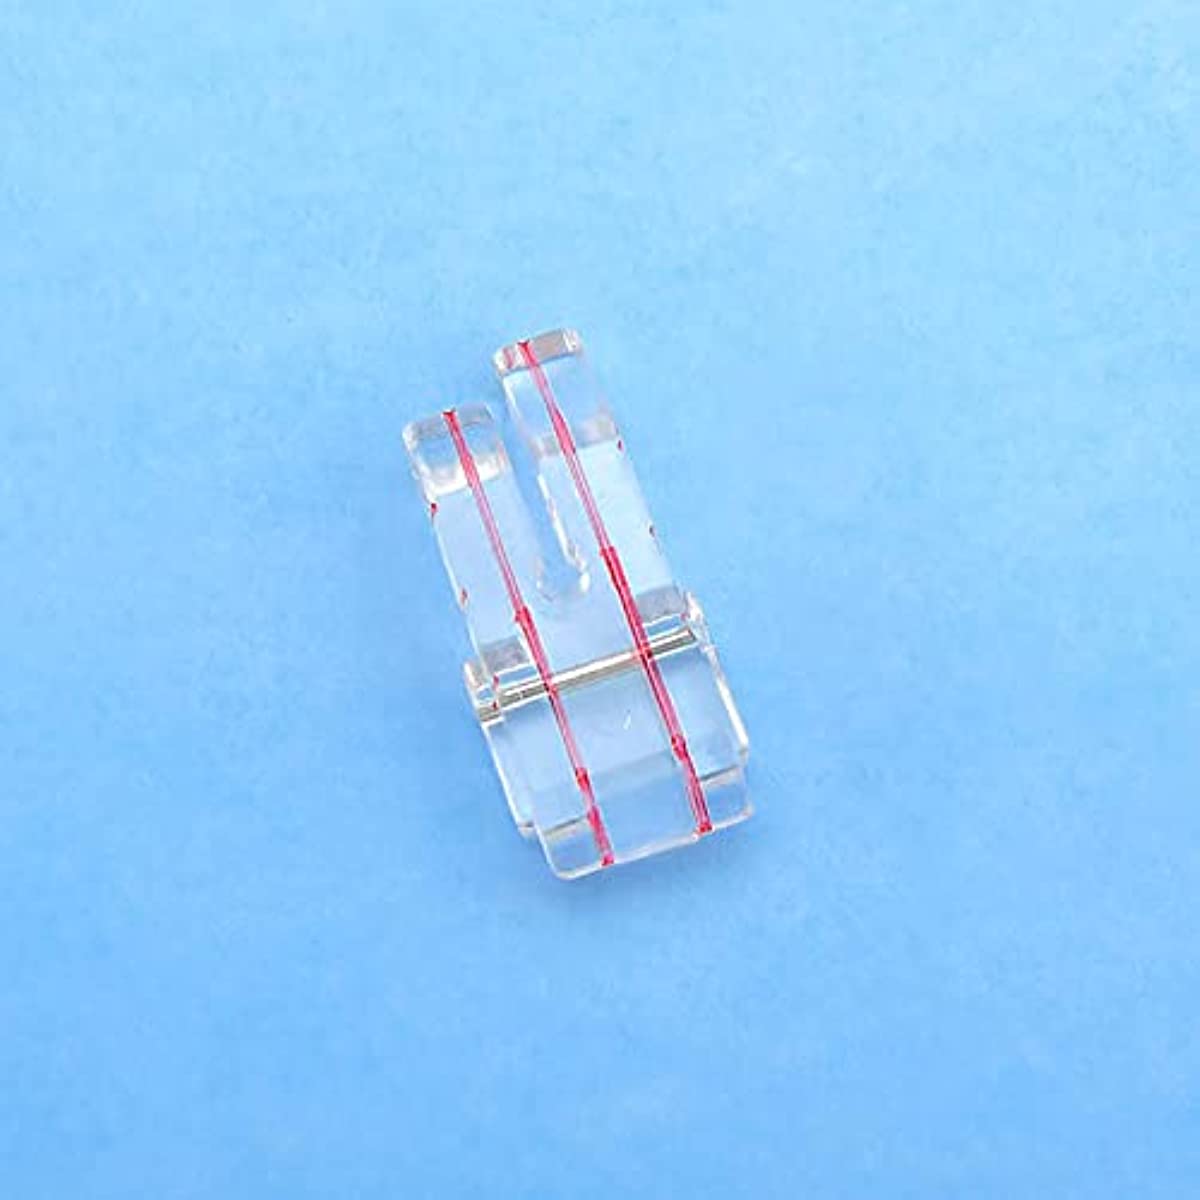  TISEKER 3 Pieces Narrow Rolled Hem Presser Foot Set (3 mm, 4  mm, 6 mm) for All Low Shank Snap-On Singer, Brother, Babylock, Euro-Pro,  Janome, Kenmore, White, Juki, Elna, New Home